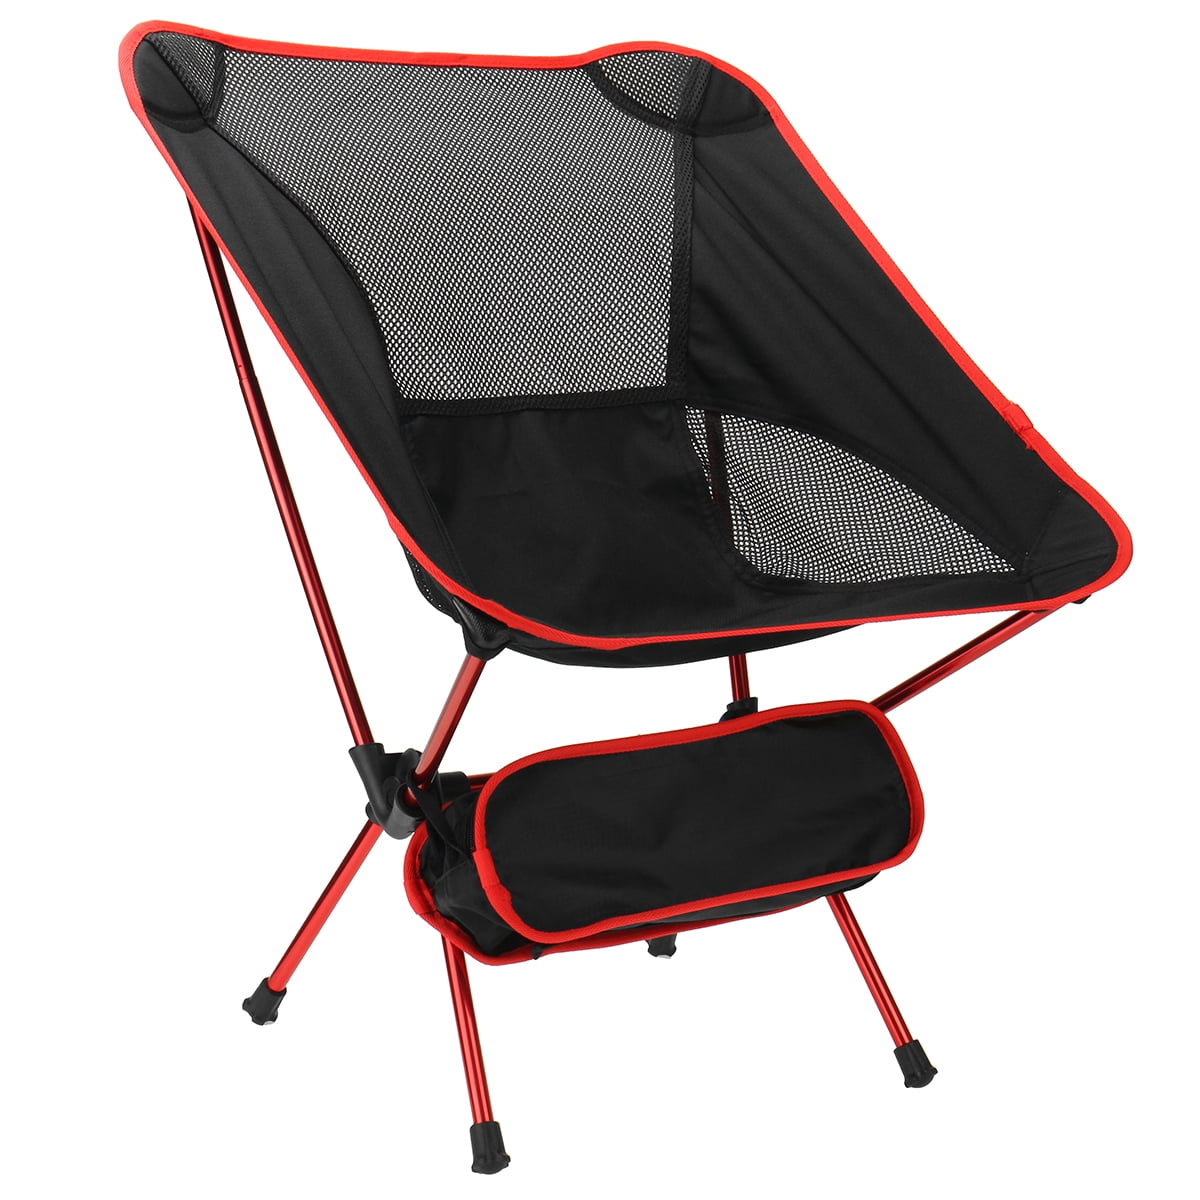 Portable Ultra-light Folding Camp Camping Chair Outdoor Hiking Foldable Chairs 